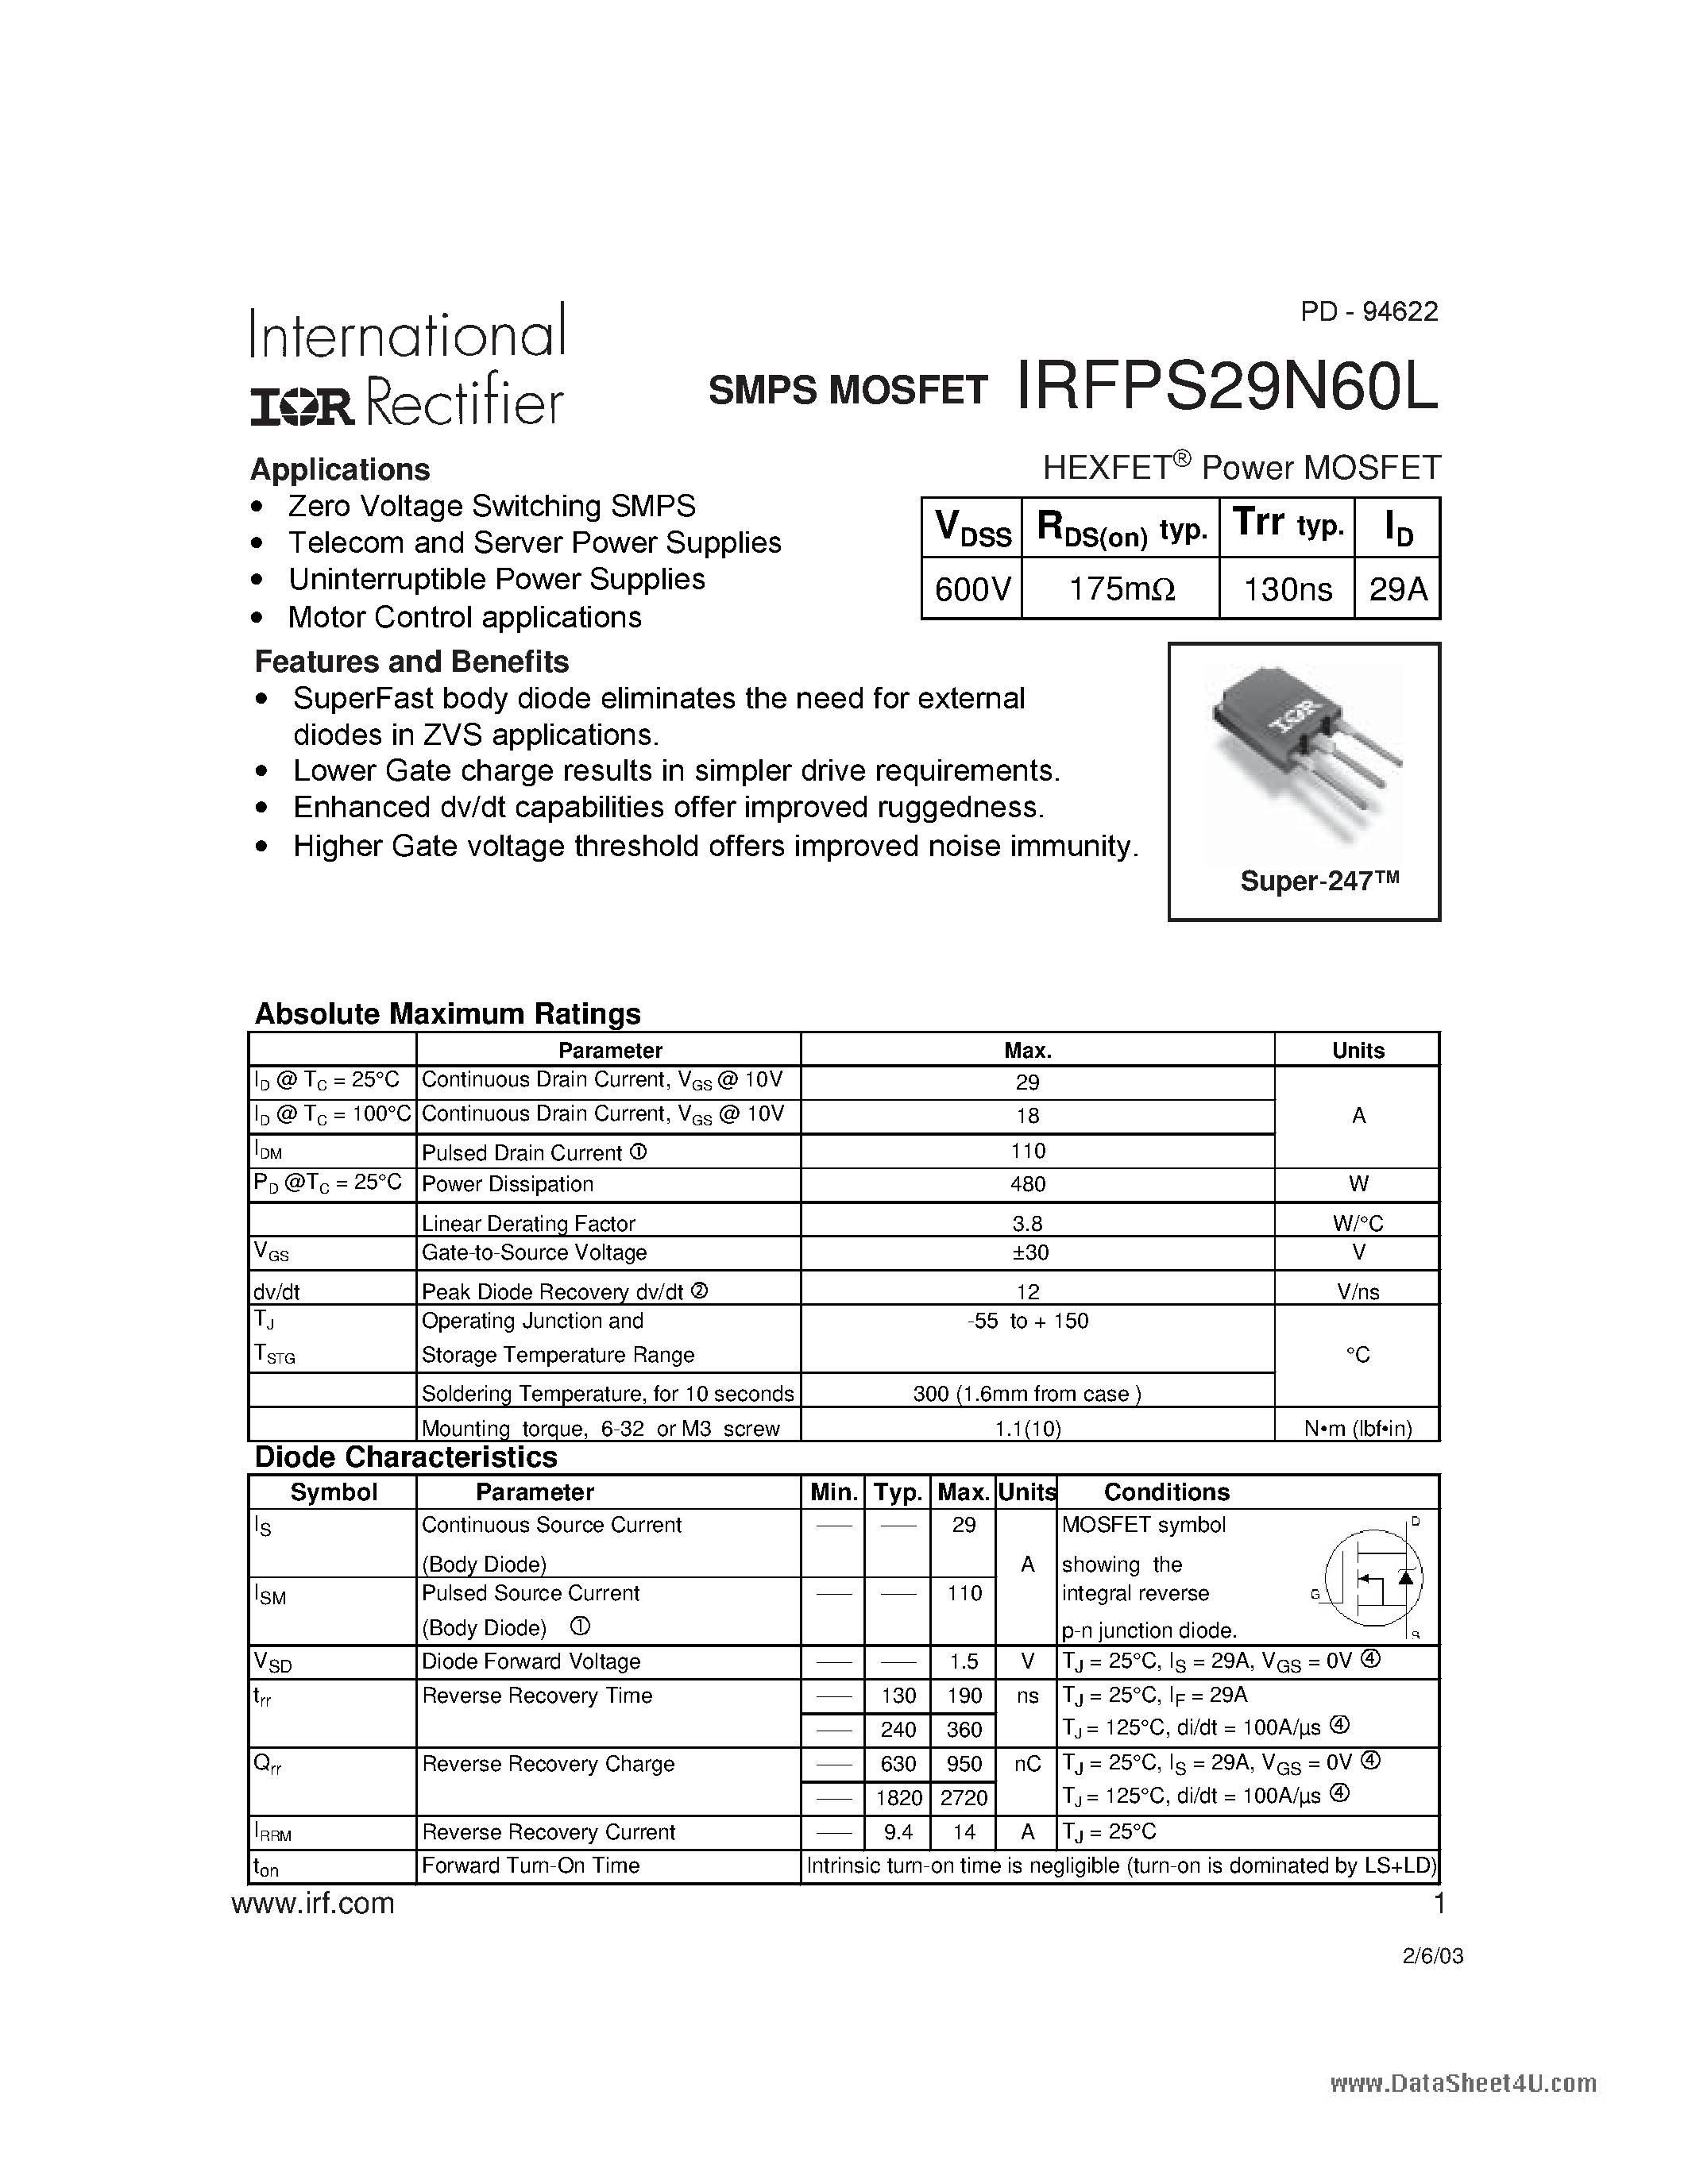 Datasheet IRFPS29N60L - SMPS MOSFET page 1